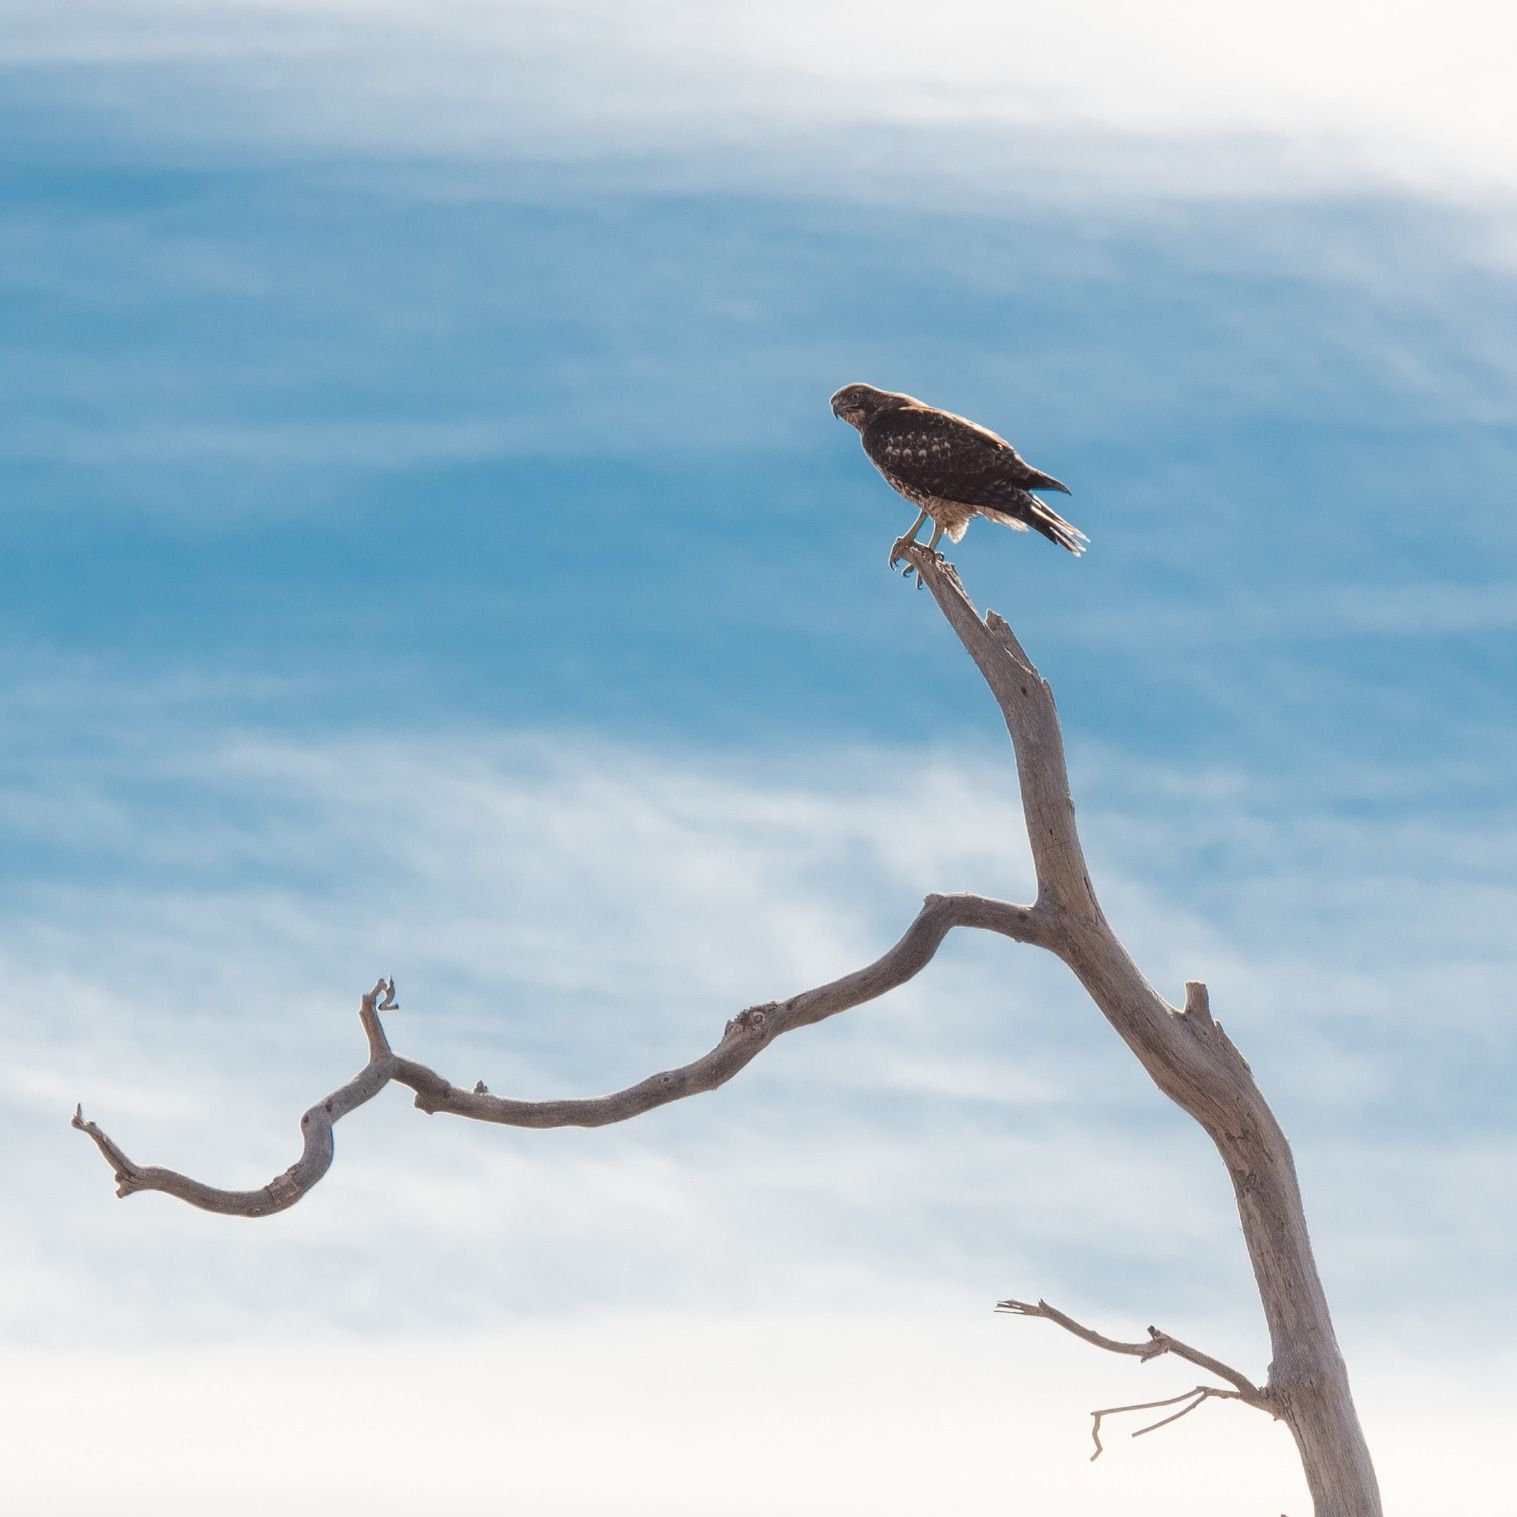 A hawk on a tree branch against a blue sky.